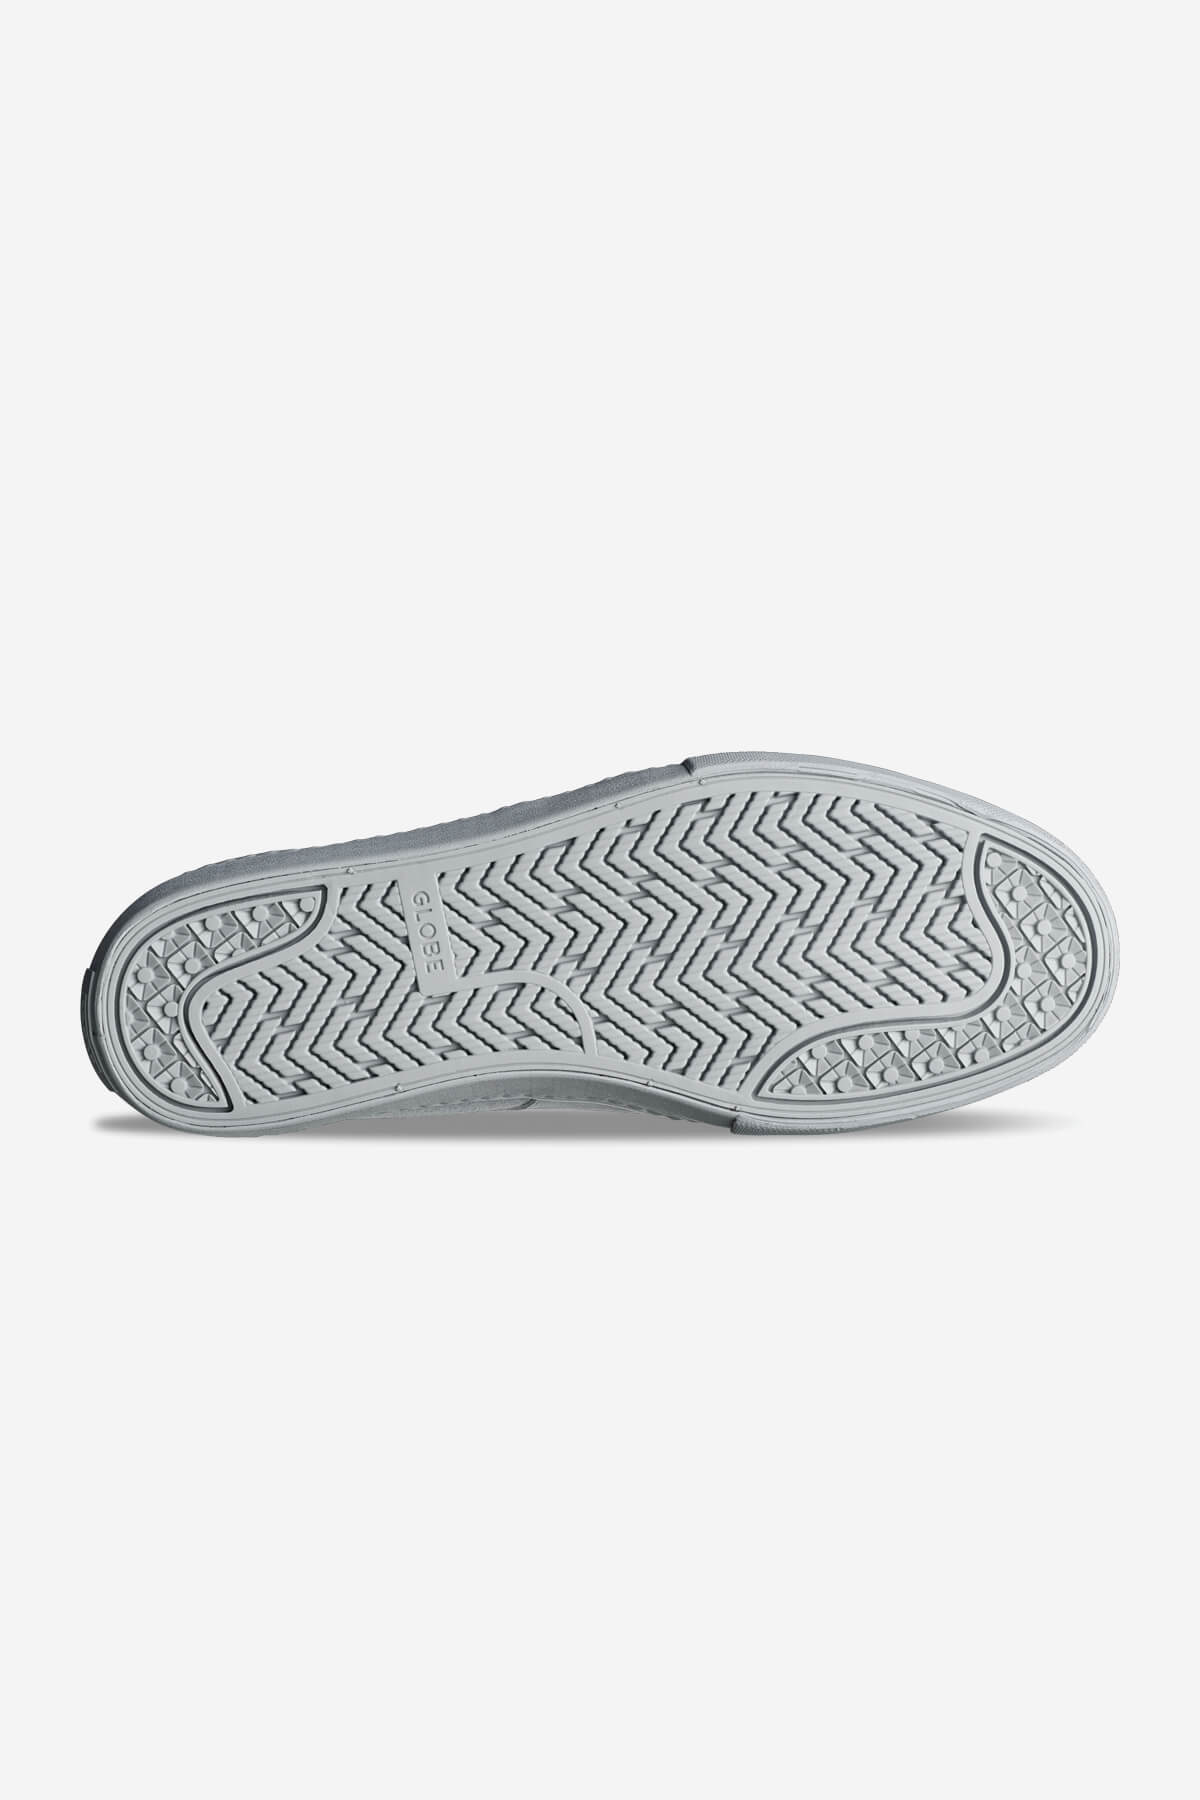 Globe Low shoes Liaizon skate shoes in Grey/Grey